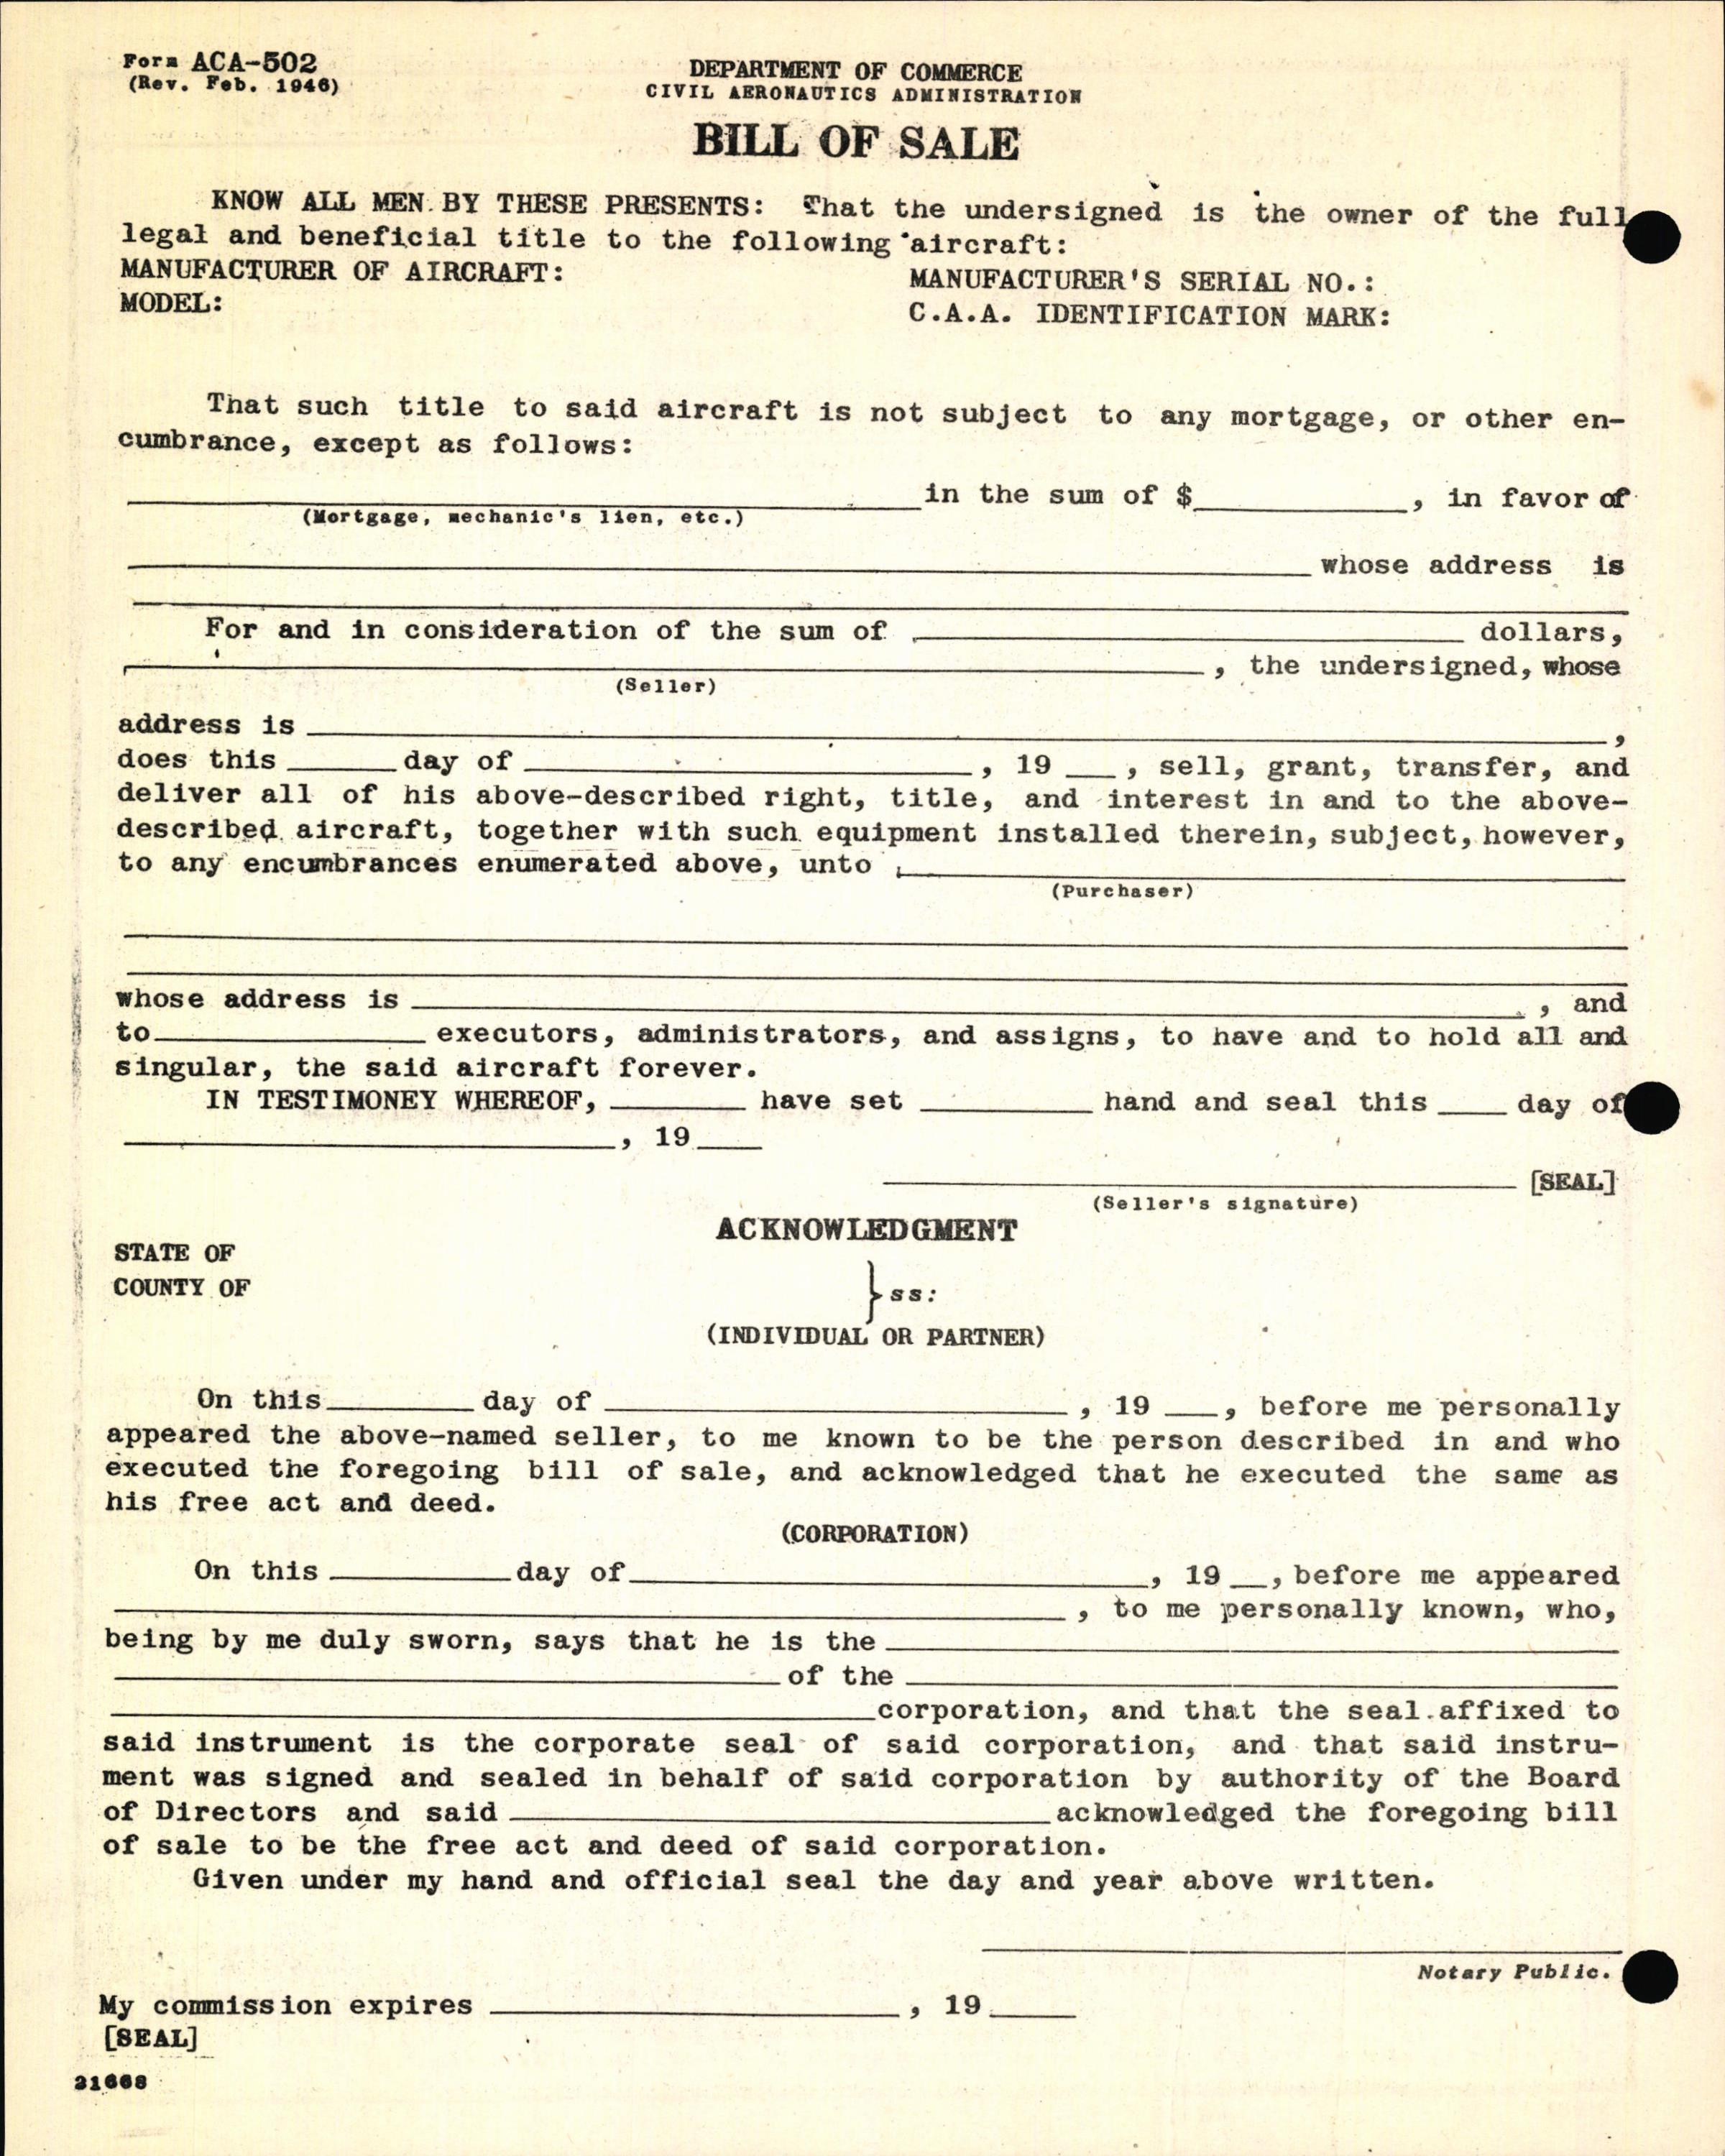 Sample page 8 from AirCorps Library document: Technical Information for Serial Number 1271